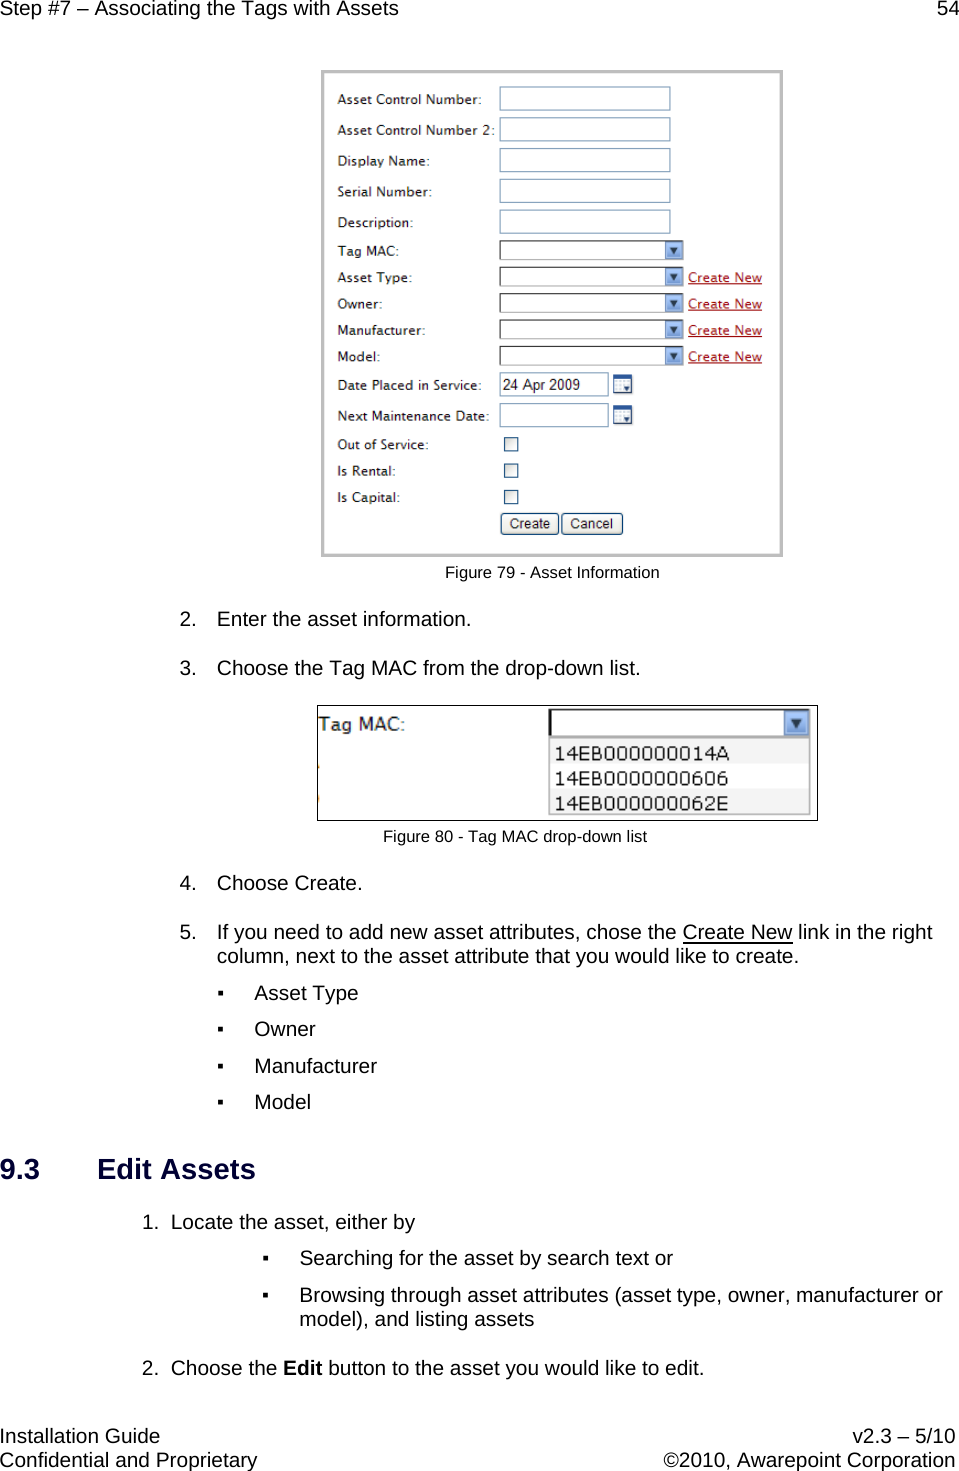 Step #7 – Associating the Tags with Assets    54   Installation Guide    v2.3 – 5/10 Confidential and Proprietary    ©2010, Awarepoint Corporation   Figure 79 - Asset Information 2. Enter the asset information. 3. Choose the Tag MAC from the drop-down list.  Figure 80 - Tag MAC drop-down list 4. Choose Create. 5. If you need to add new asset attributes, chose the Create New▪ Asset Type  link in the right column, next to the asset attribute that you would like to create.   ▪ Owner ▪ Manufacturer ▪ Model 9.3 Edit Assets 1.  Locate the asset, either by ▪ Searching for the asset by search text or ▪ Browsing through asset attributes (asset type, owner, manufacturer or model), and listing assets 2.  Choose the Edit button to the asset you would like to edit. 